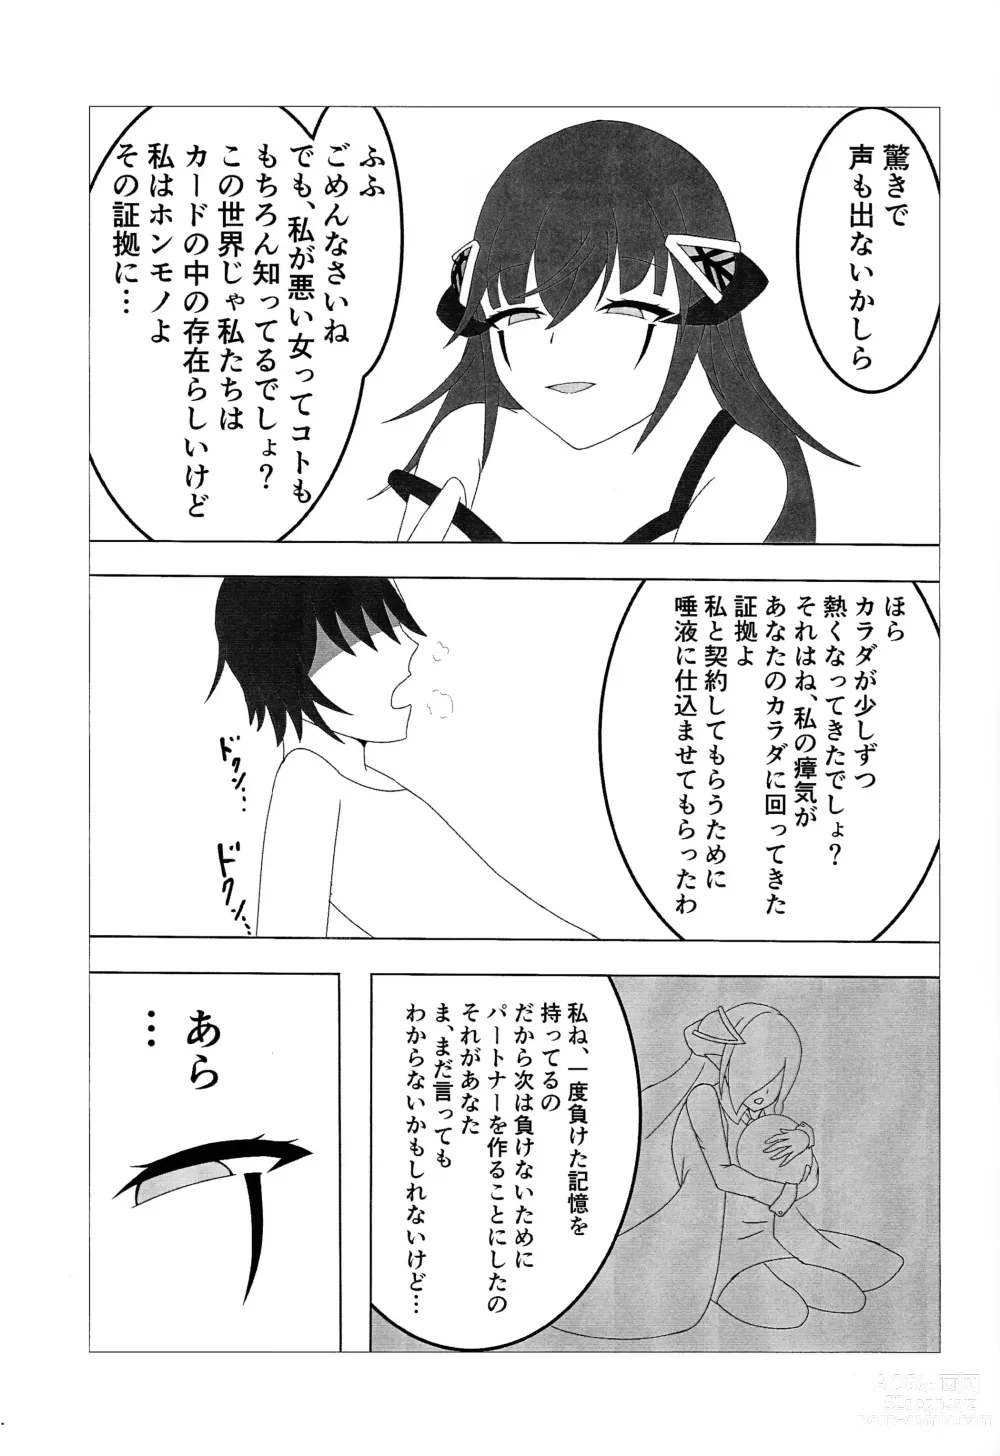 Page 6 of doujinshi FLAMES OF THIS AFFECTION